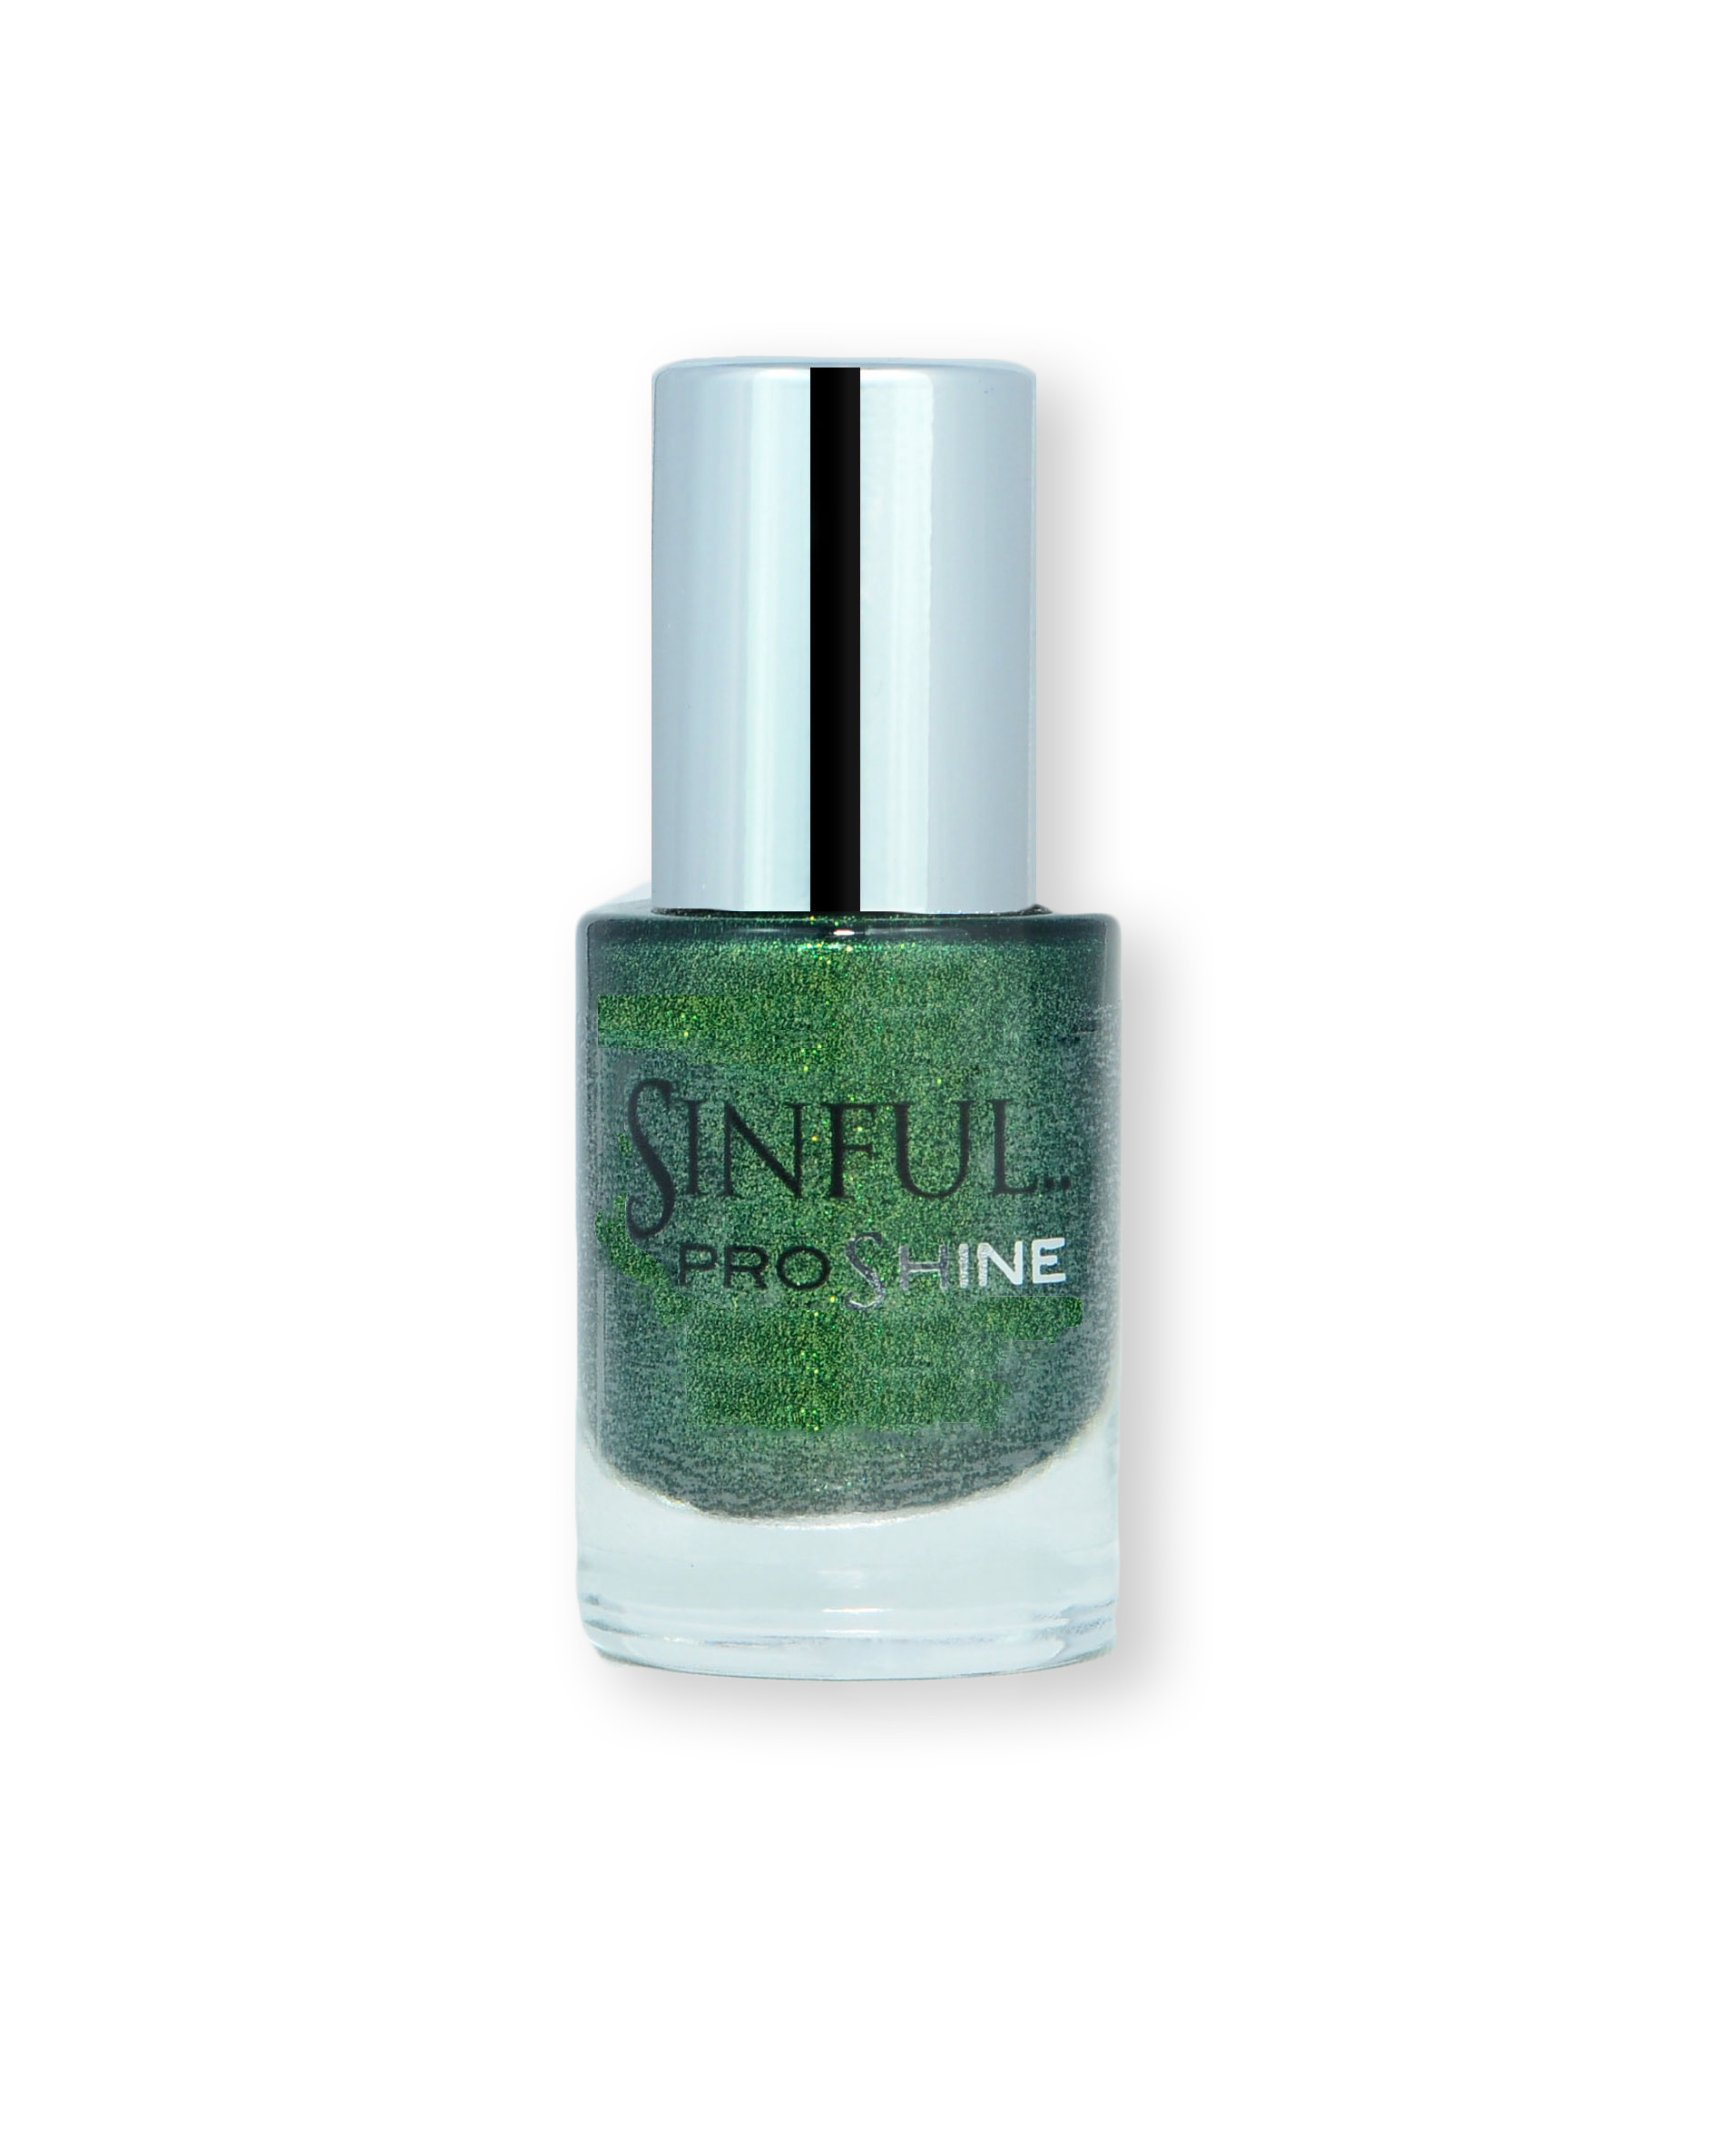 Sinful PROshine is a revolution into top spec imitation gel-like formula, easy application, full coverage and a sleek finish. Spoil yourself with the choice of 42 shades, expertly formulated with the finest grade of pigments. Wild Child: Vivid green and emerald crystals finely blended together